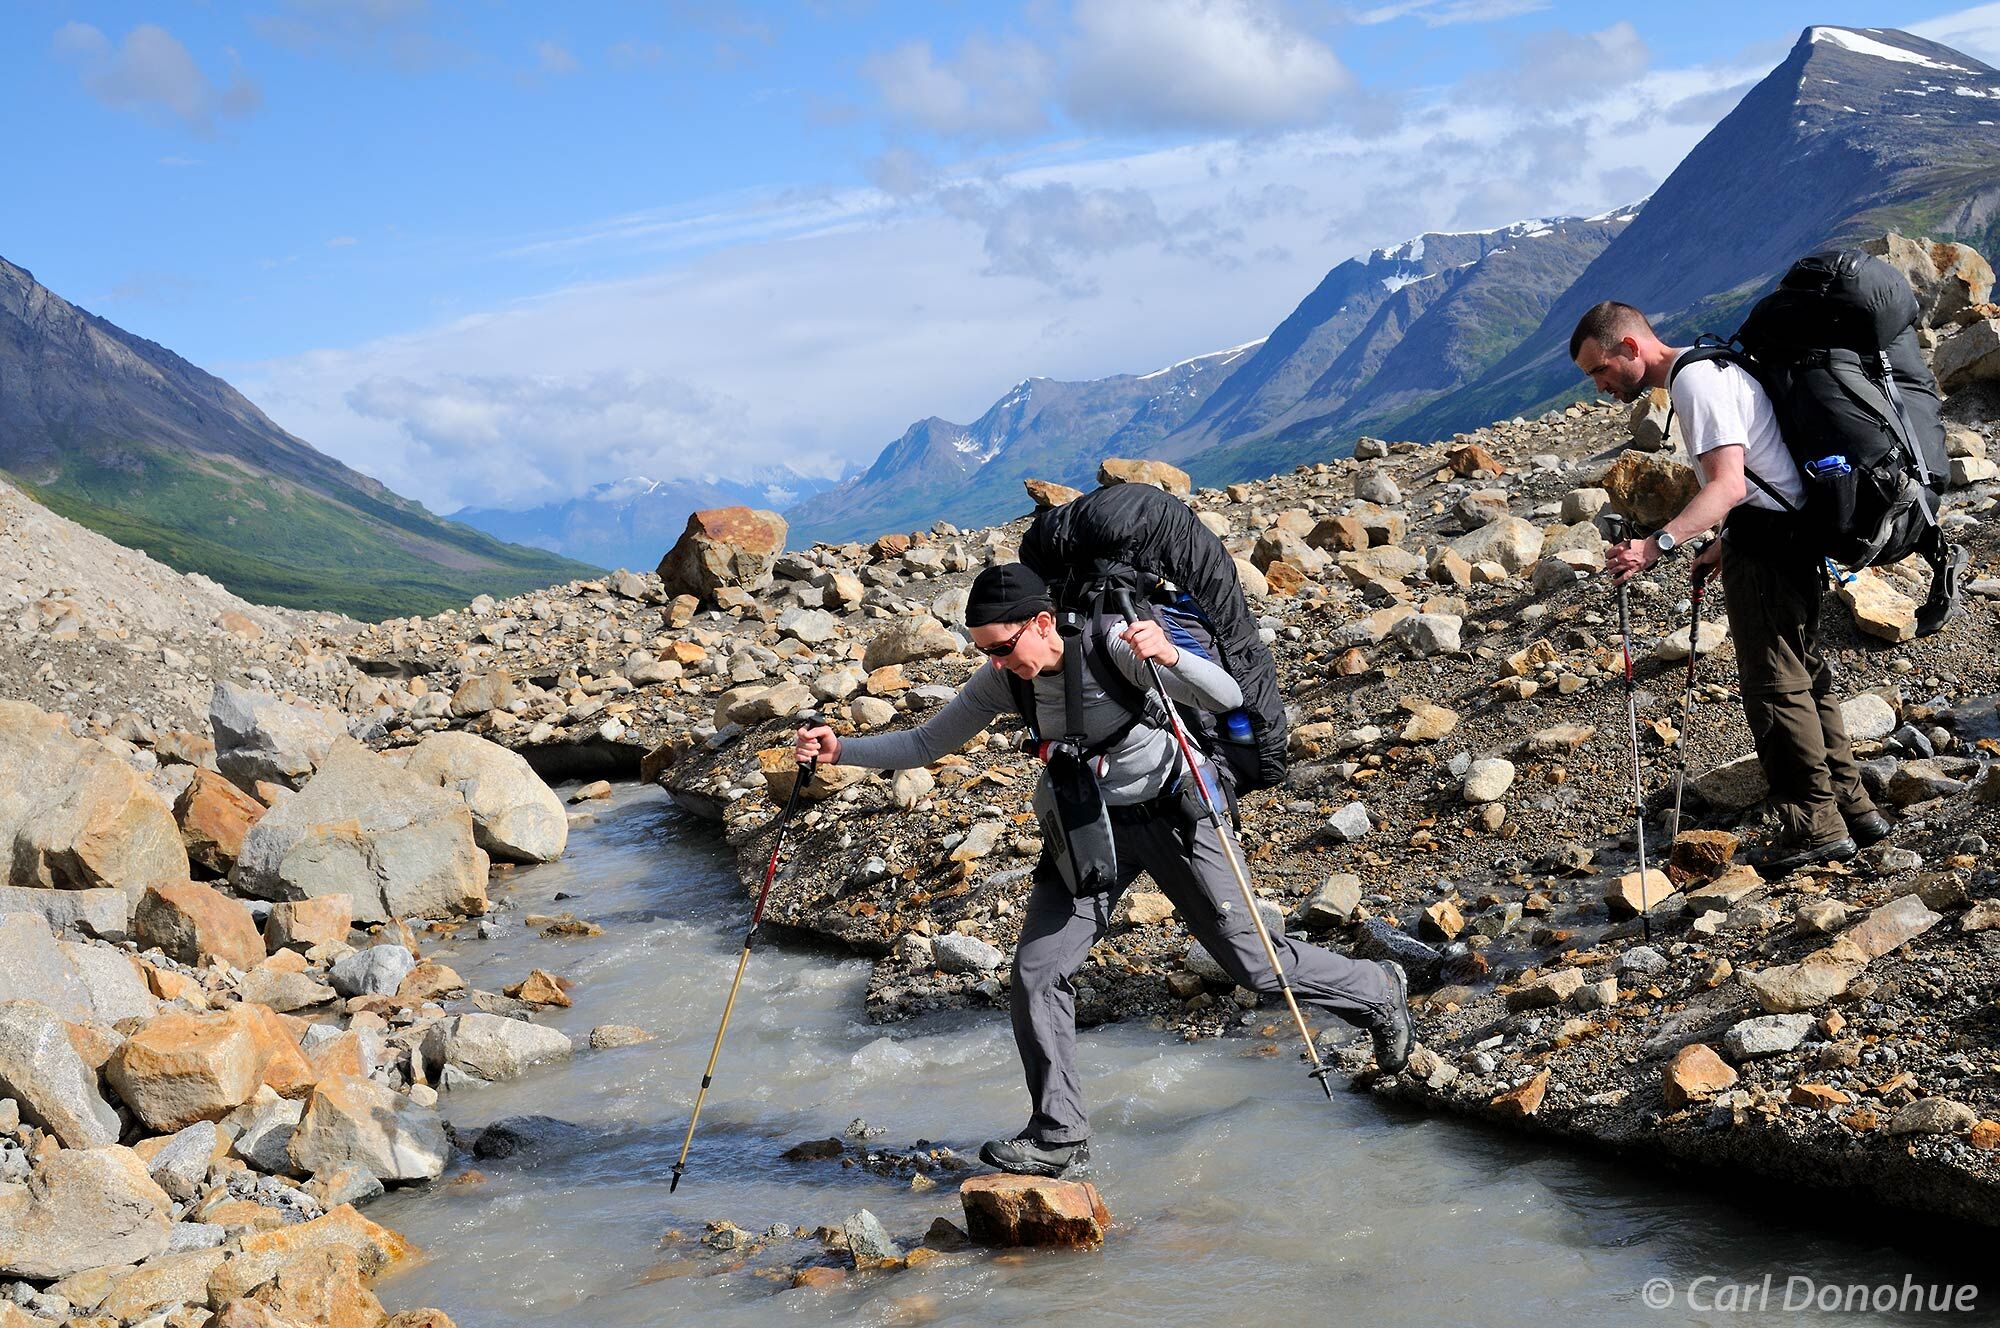 Backpackers crossing a small stream on the Tana Lobe of the bremner Glacier, in the Chugach Mountains. The Chugach extend into...